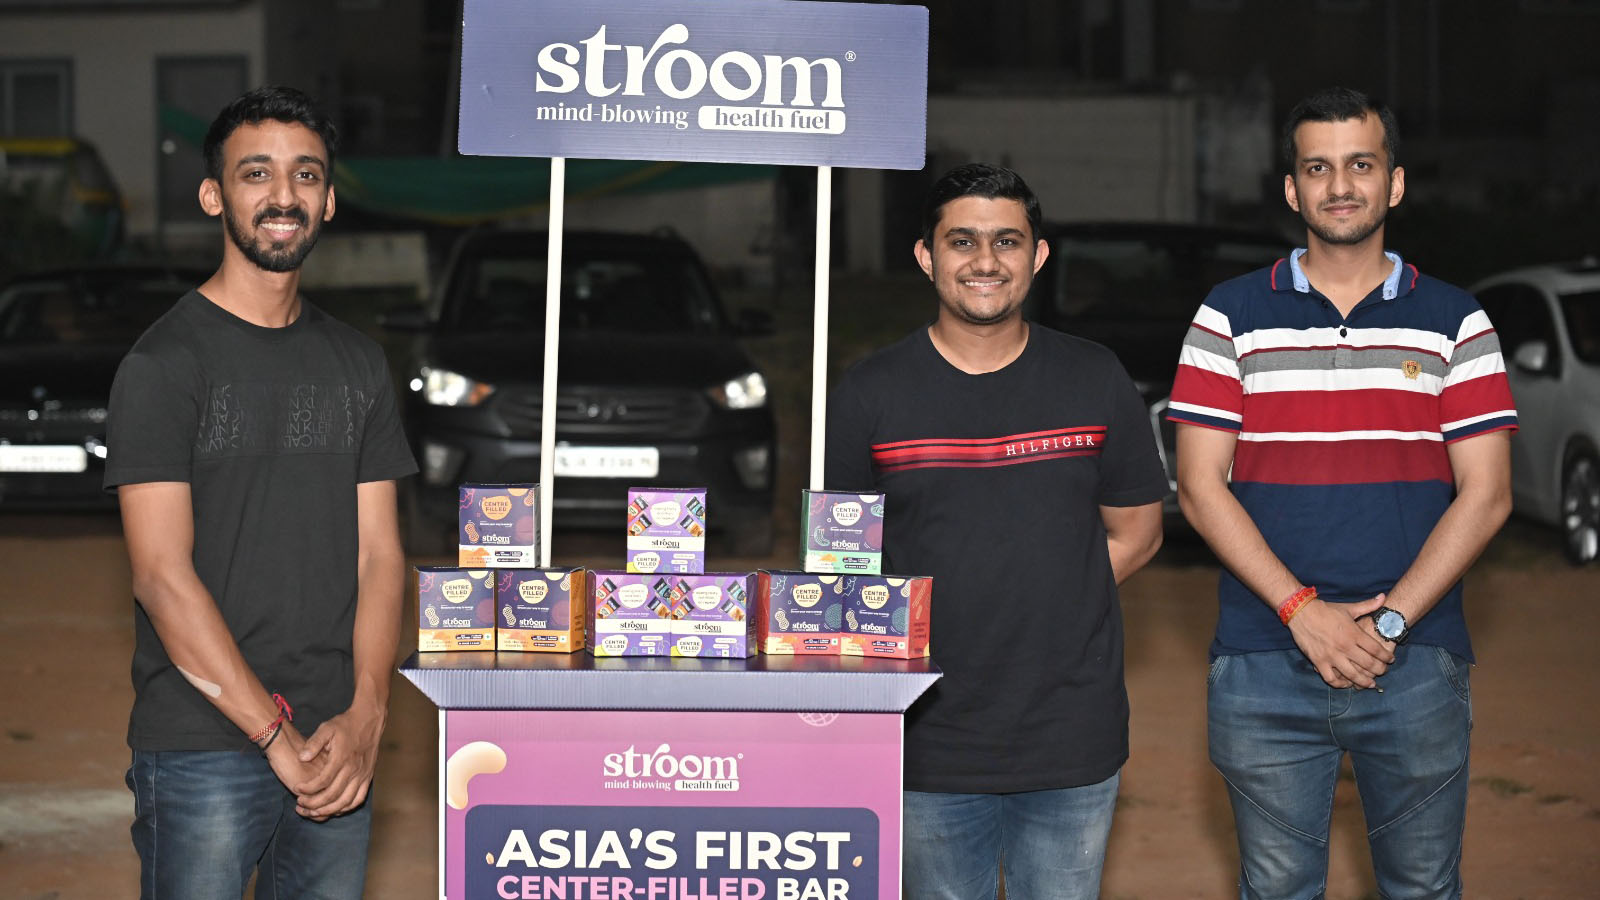 Three men are standing at a purple 'Stroom' booth, advertising energy bars